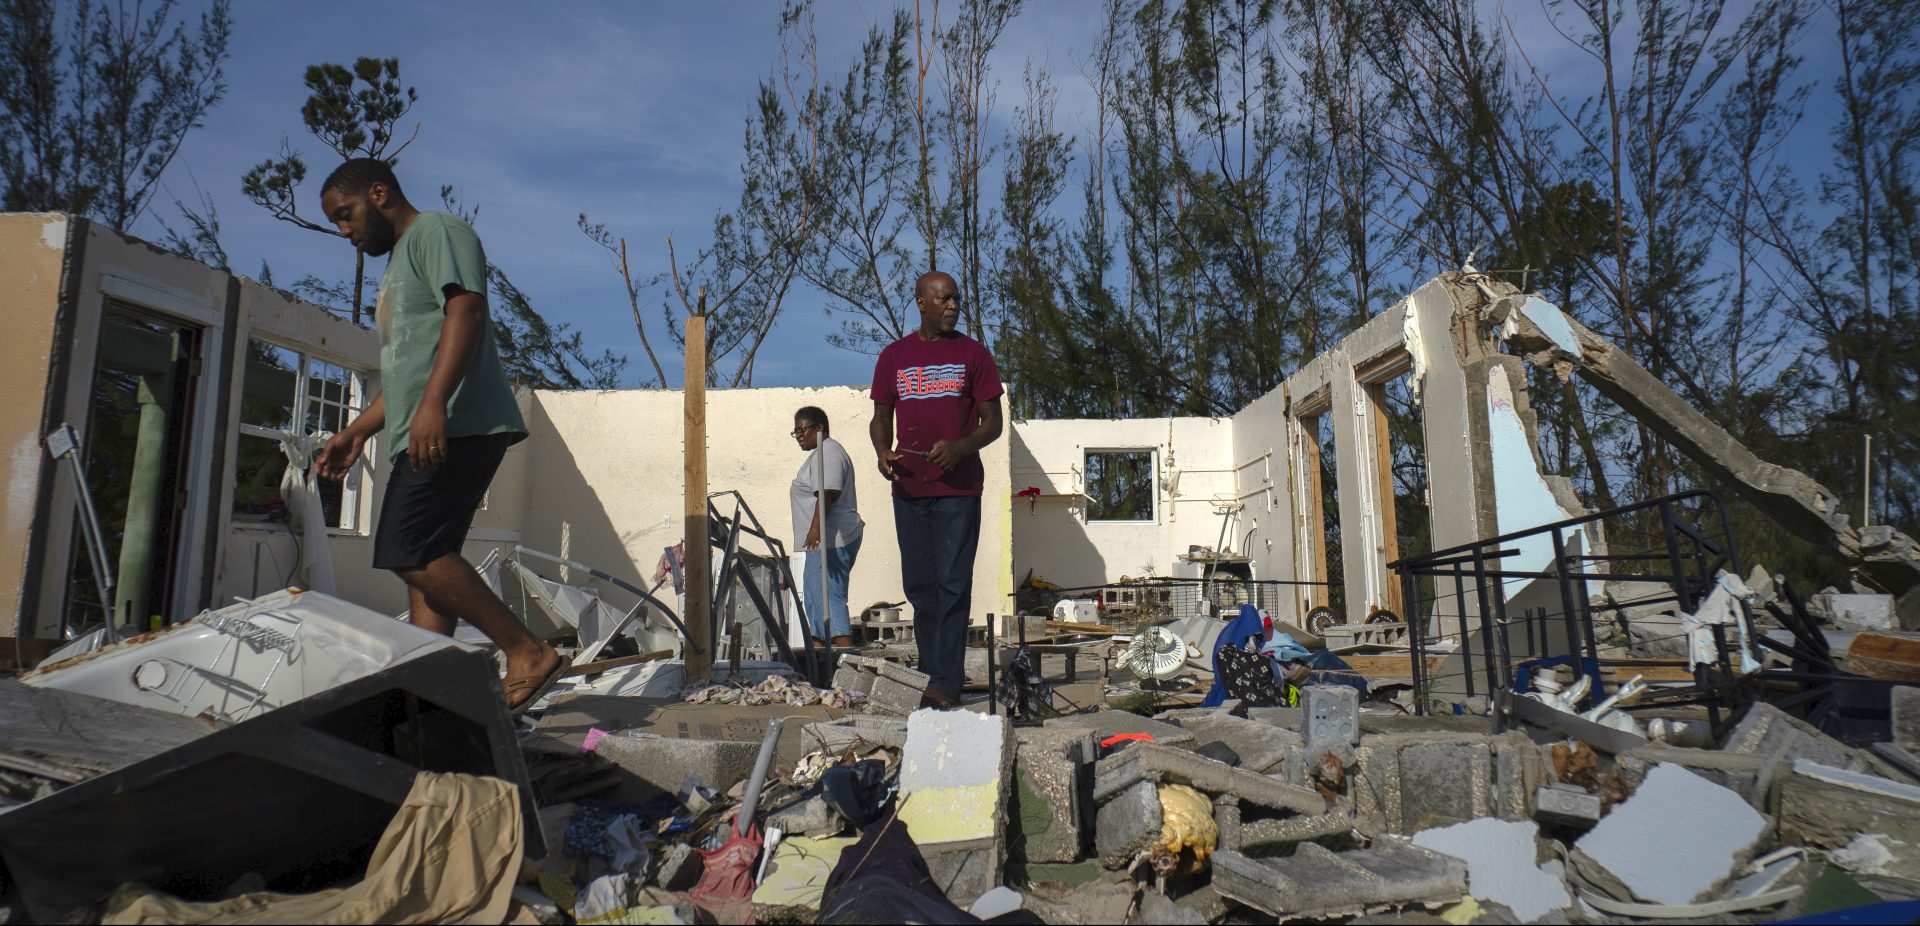 George Bolter, left, and his parents walk through the remains of his home destroyed by Hurricane Dorian in the Pine Bay neighborhood of Freeport, Bahamas, Wednesday, Sept. 4, 2019. Rescuers trying to reach drenched and stunned victims in the Bahamas fanned out across a blasted landscape of smashed and flooded homes Wednesday, while disaster relief organizations rushed to bring in food and medicine.